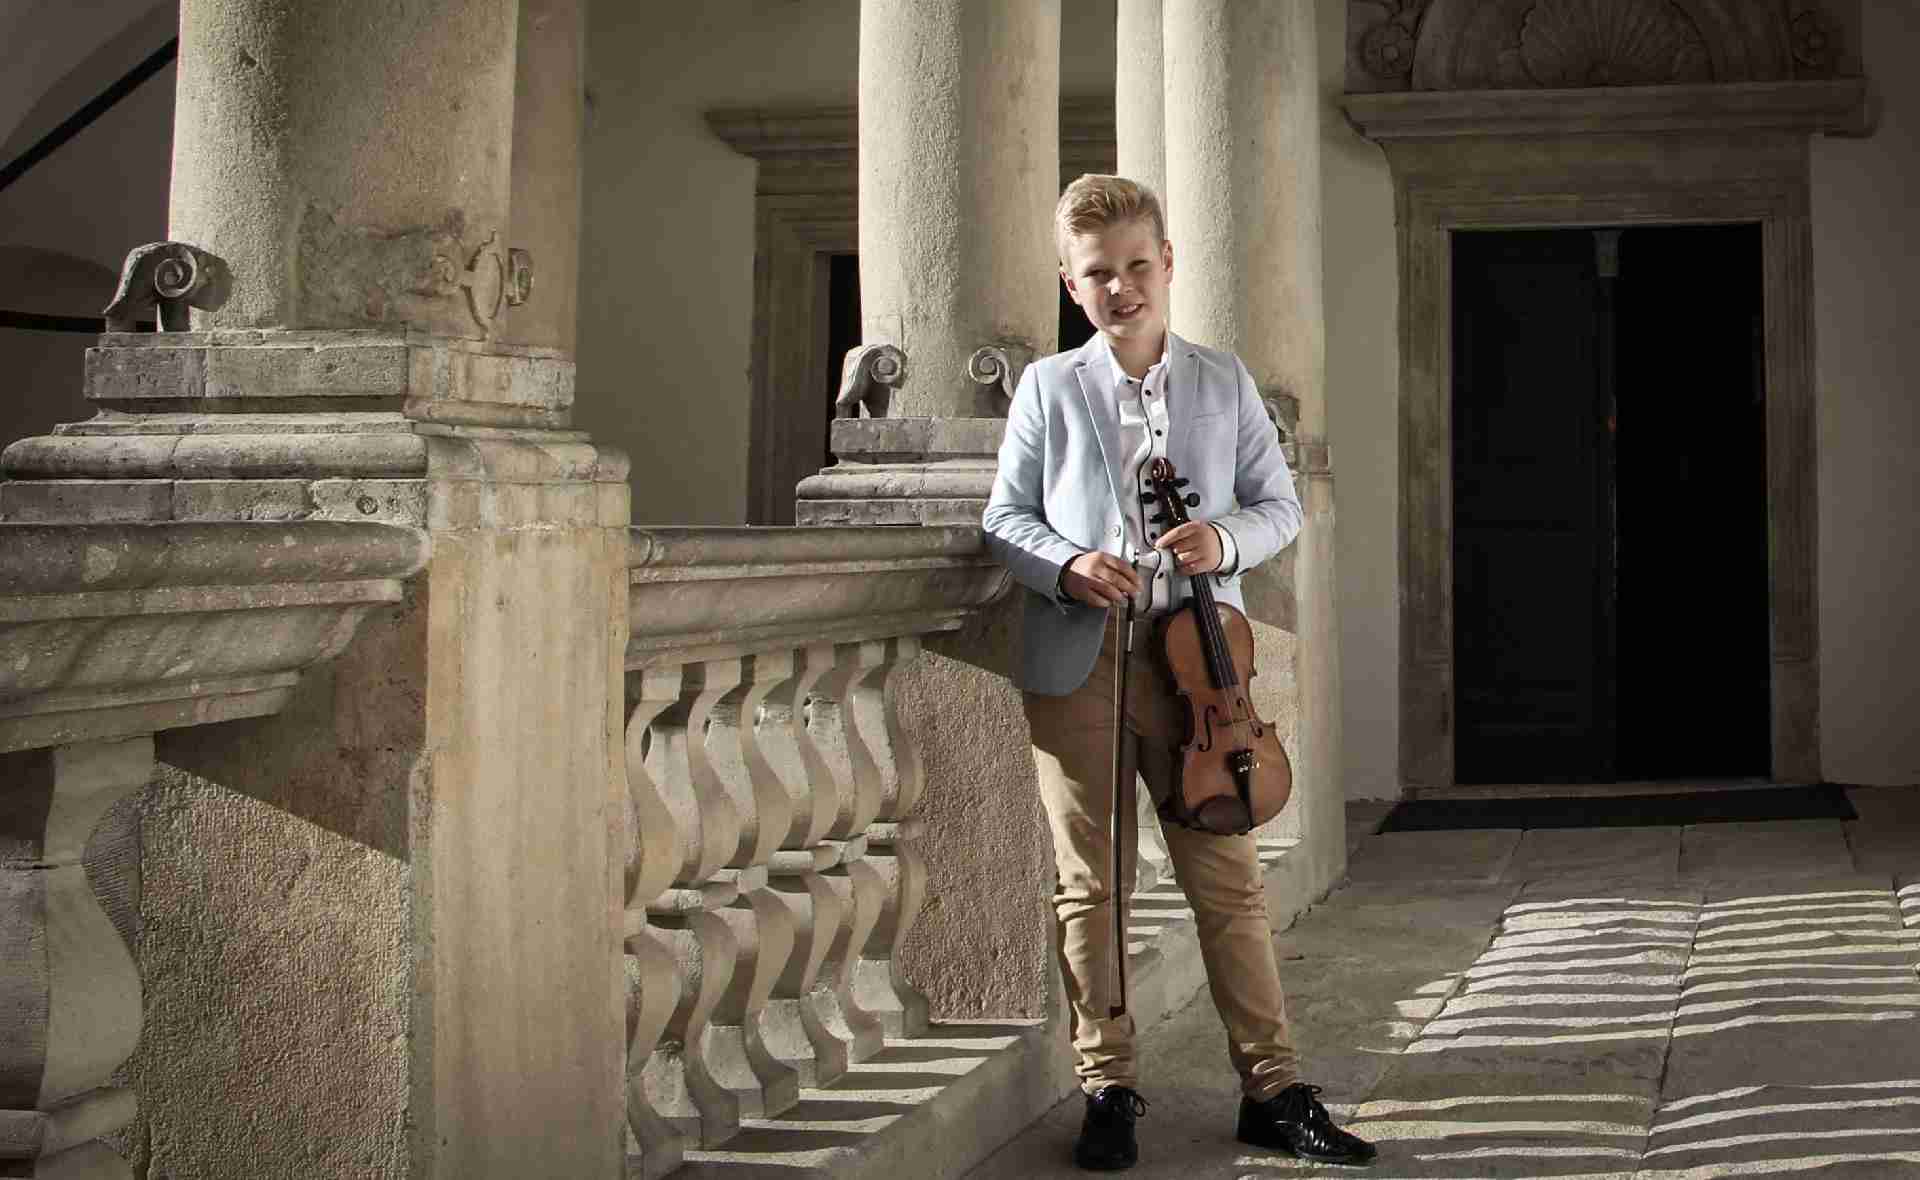 Young Hungarian virtuoso at the Golden Classical Music Awards